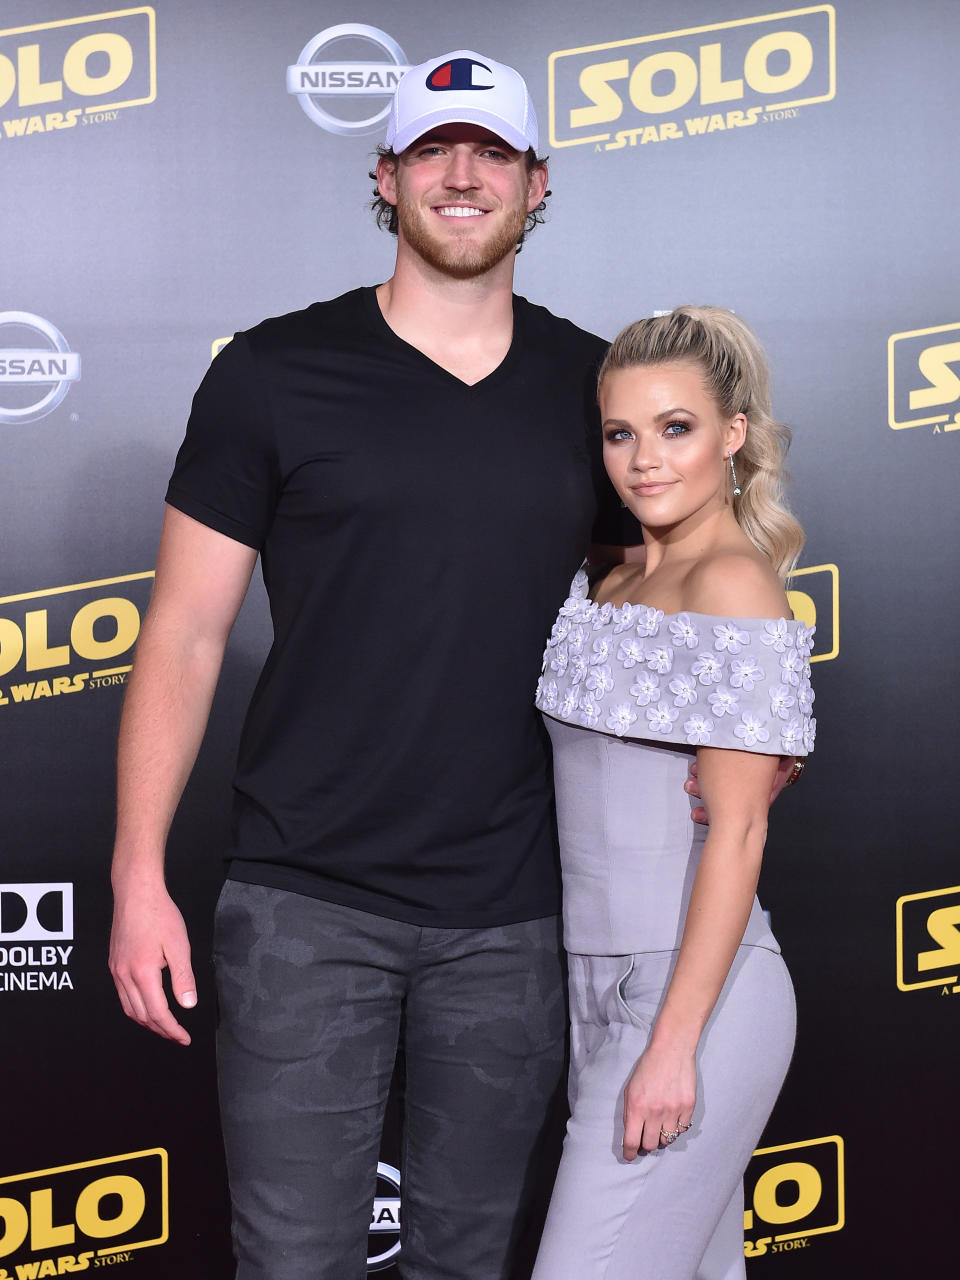 Carson McAllister and Witney Carson attend the "Solo: A Star Wars Story" premiere on May 10, 2018